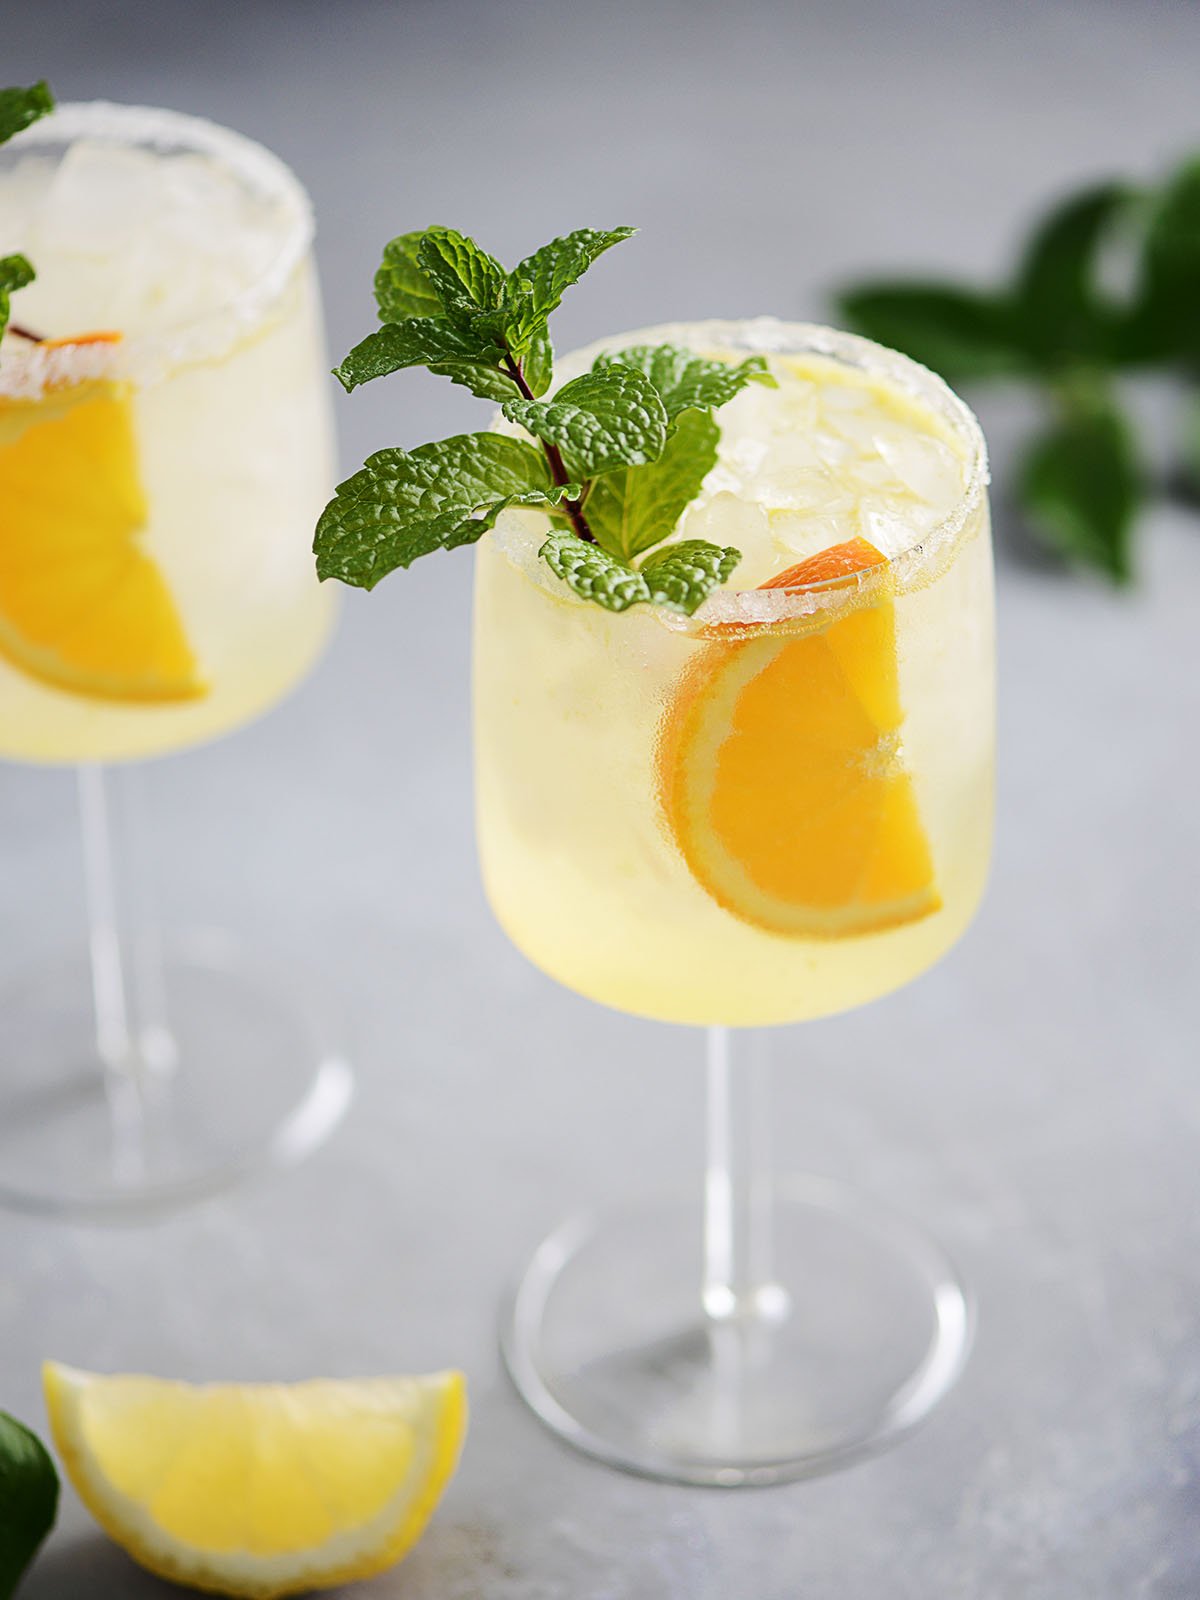 Two cocktail glasses with vodka collins garnished with an orange slice and a mint sprig.